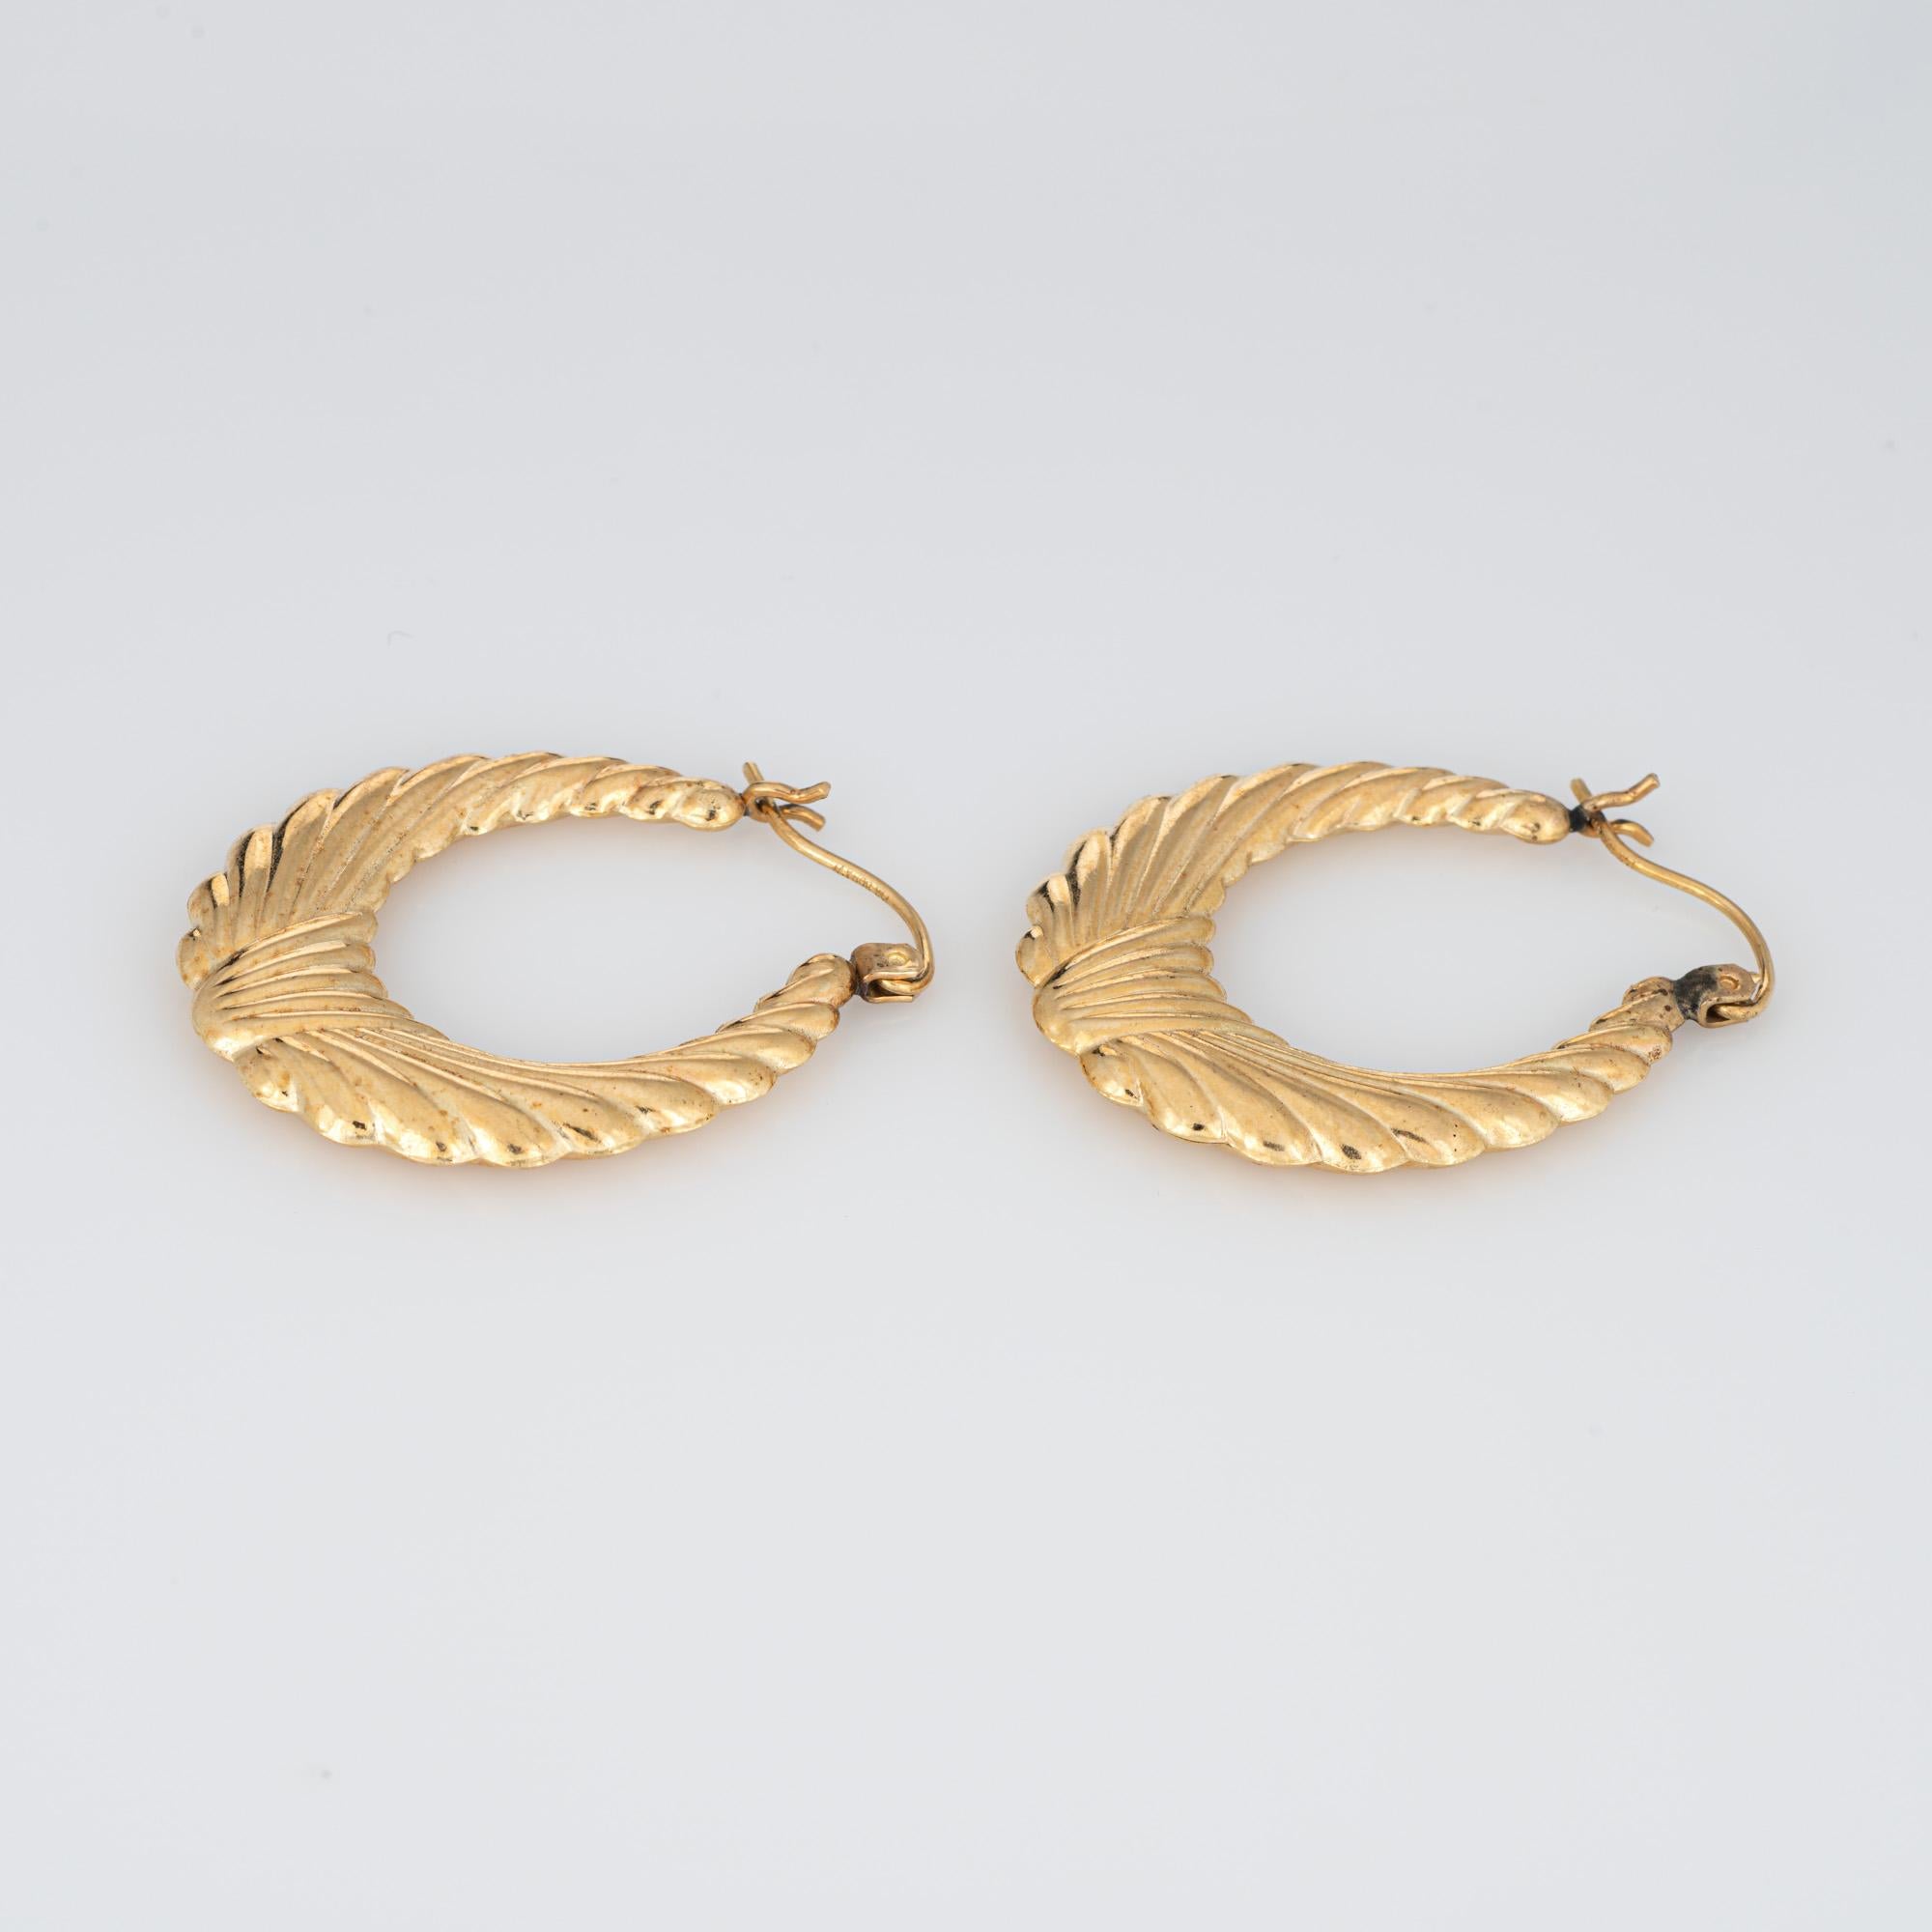 Fine detailed pair of oval wreath hoop earrings crafted in 14k yellow gold (circa 1980s to 1990s).

The stylish earrings feature a wreath design. The hollow earrings offer a lightweight feel for a comfortable fit on the earlobe. The earrings are